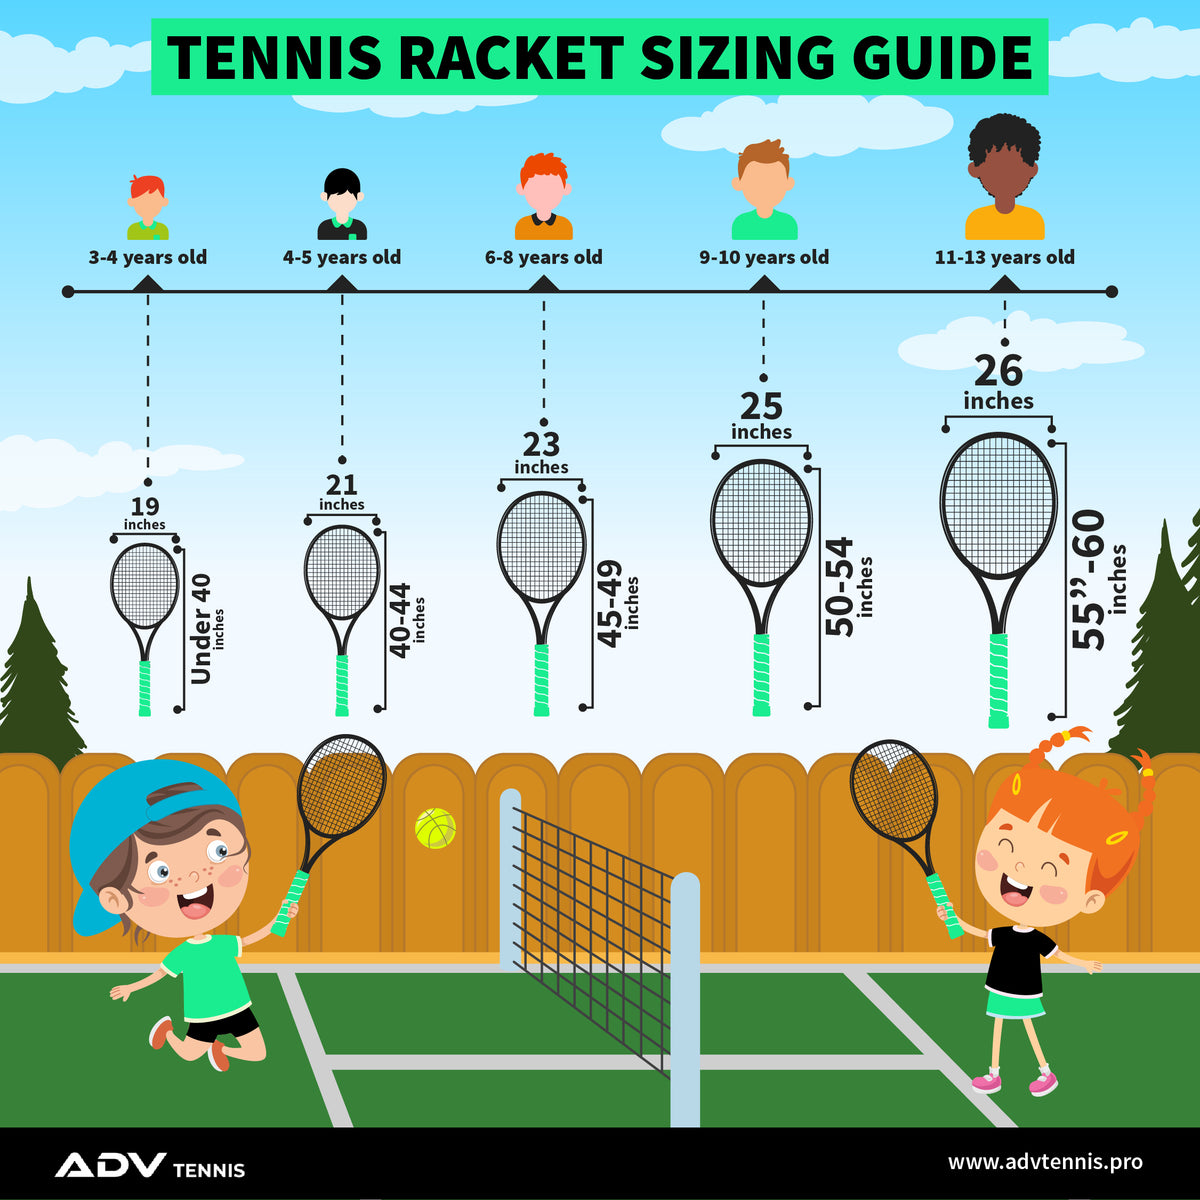 Tennis Racket Sizing Guide Infographic with under 40 inches long and 19 inches wide racket for kids up to 4 years all the way up to 55 to 60 inches long and 26 inches wide tennis racket for kids between 11 and 13 years